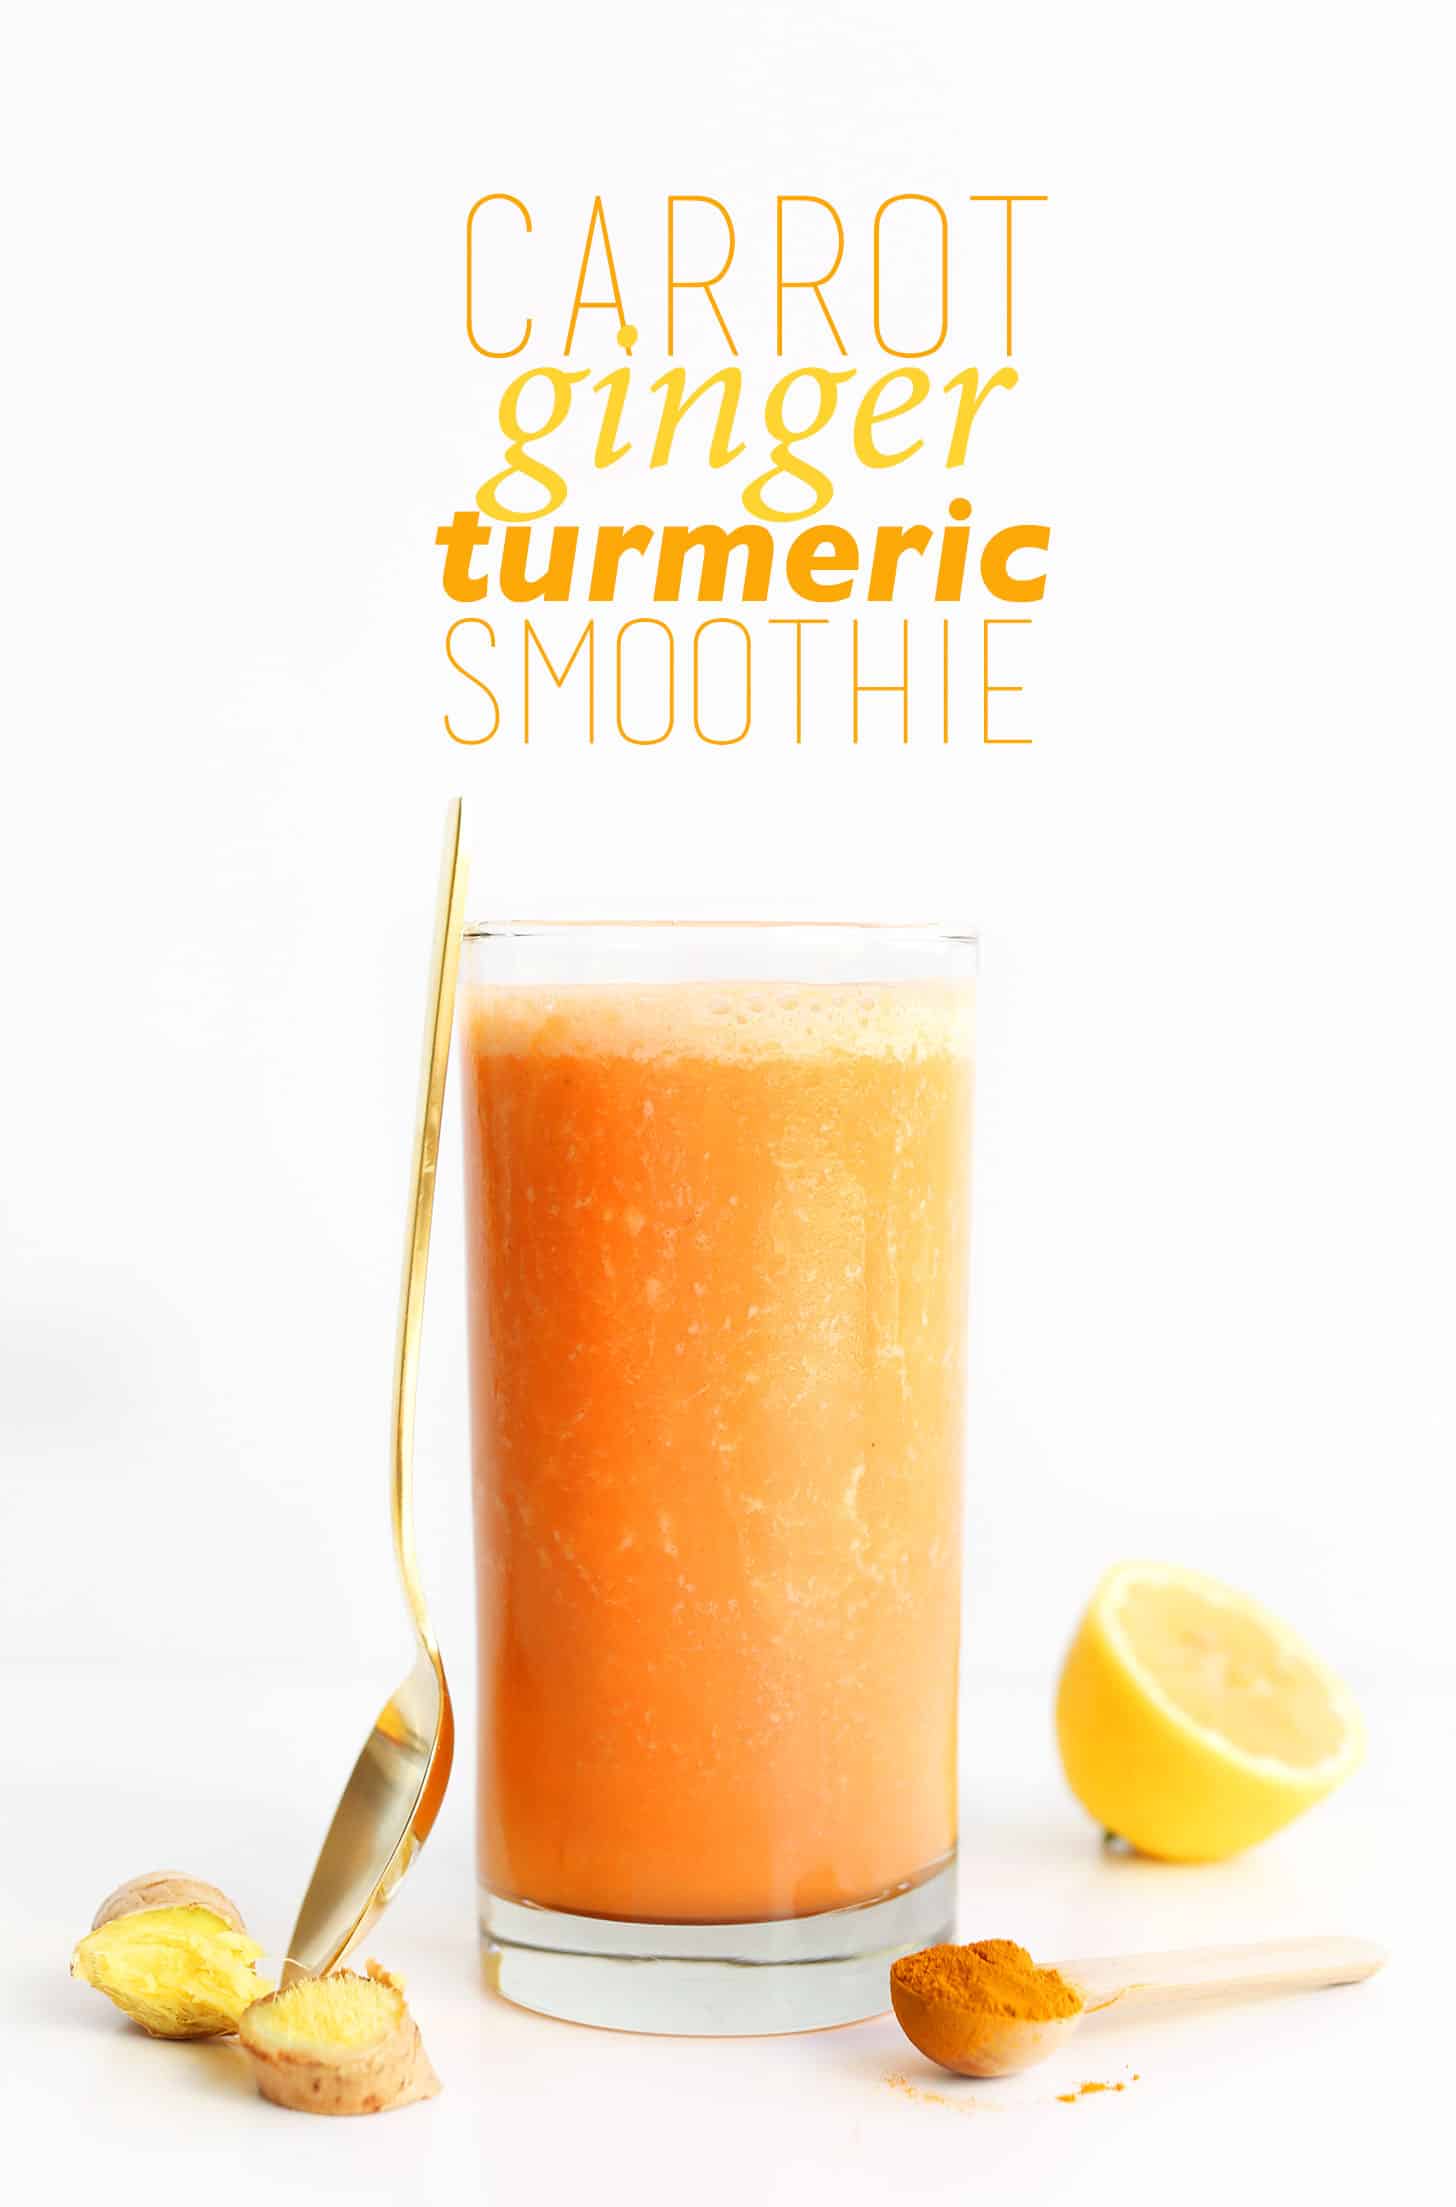 Carrot ginger turmeric smoothie